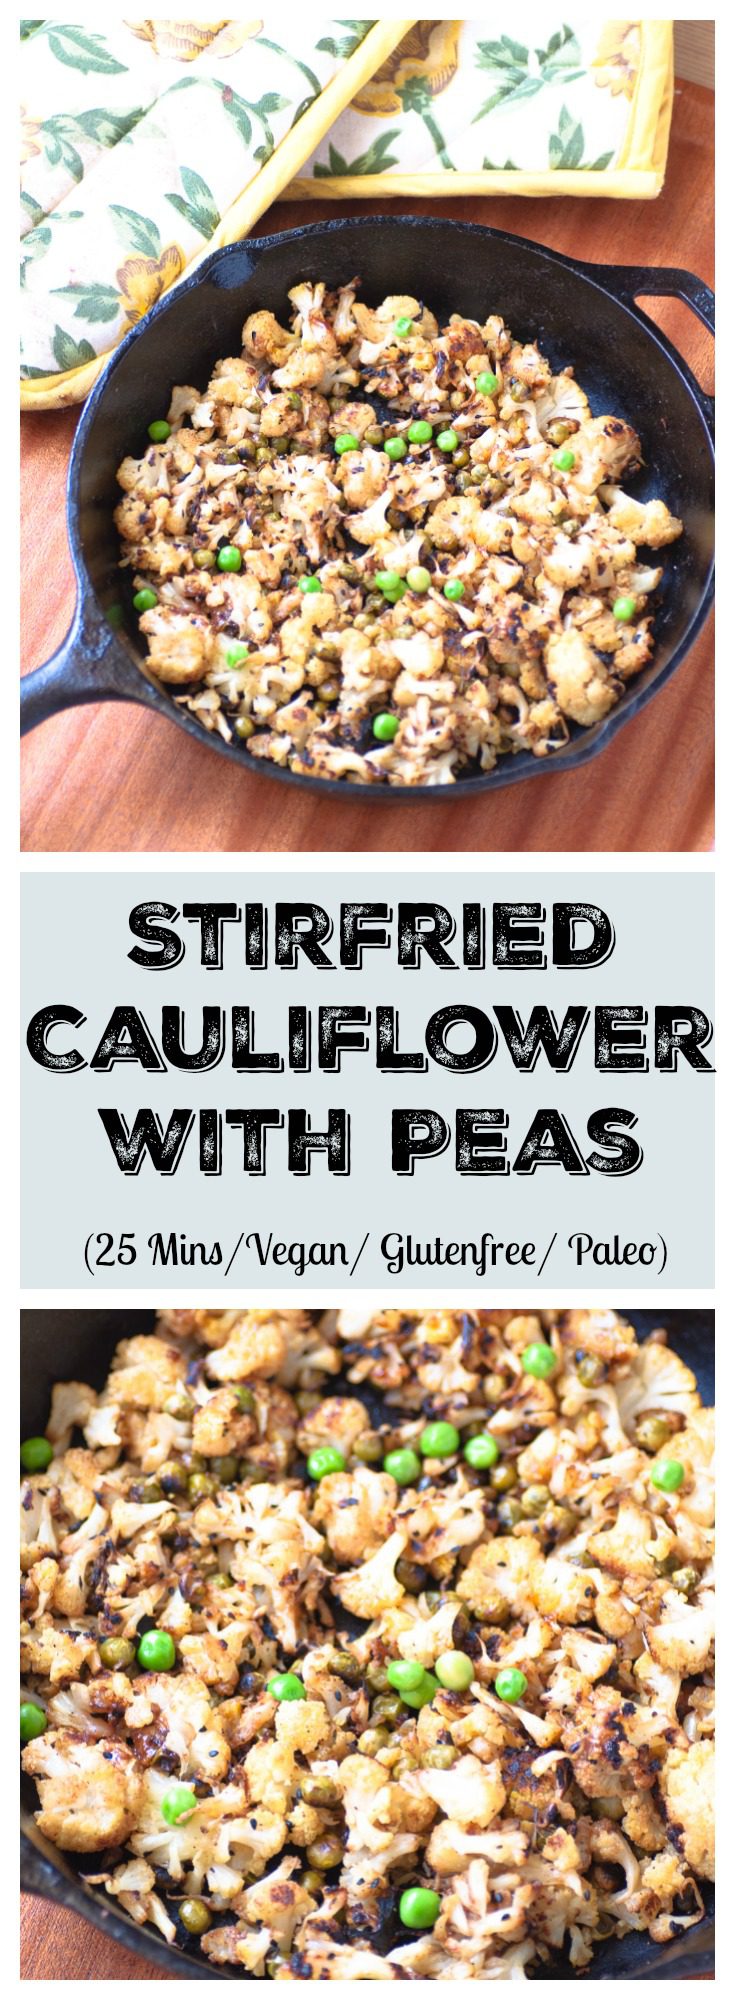 Stirfried Cauliflower With Peas is an easy and delicious side with distinct flavours of nigella seeds & curry. It’s ready in 25 mins and is perfect as a side or as a filling for wraps/ sandwiches. It’s #vegan, #glutenfree and #paleo friendly to boot. Only 171Cals/ portion. #realfood #vegetarian